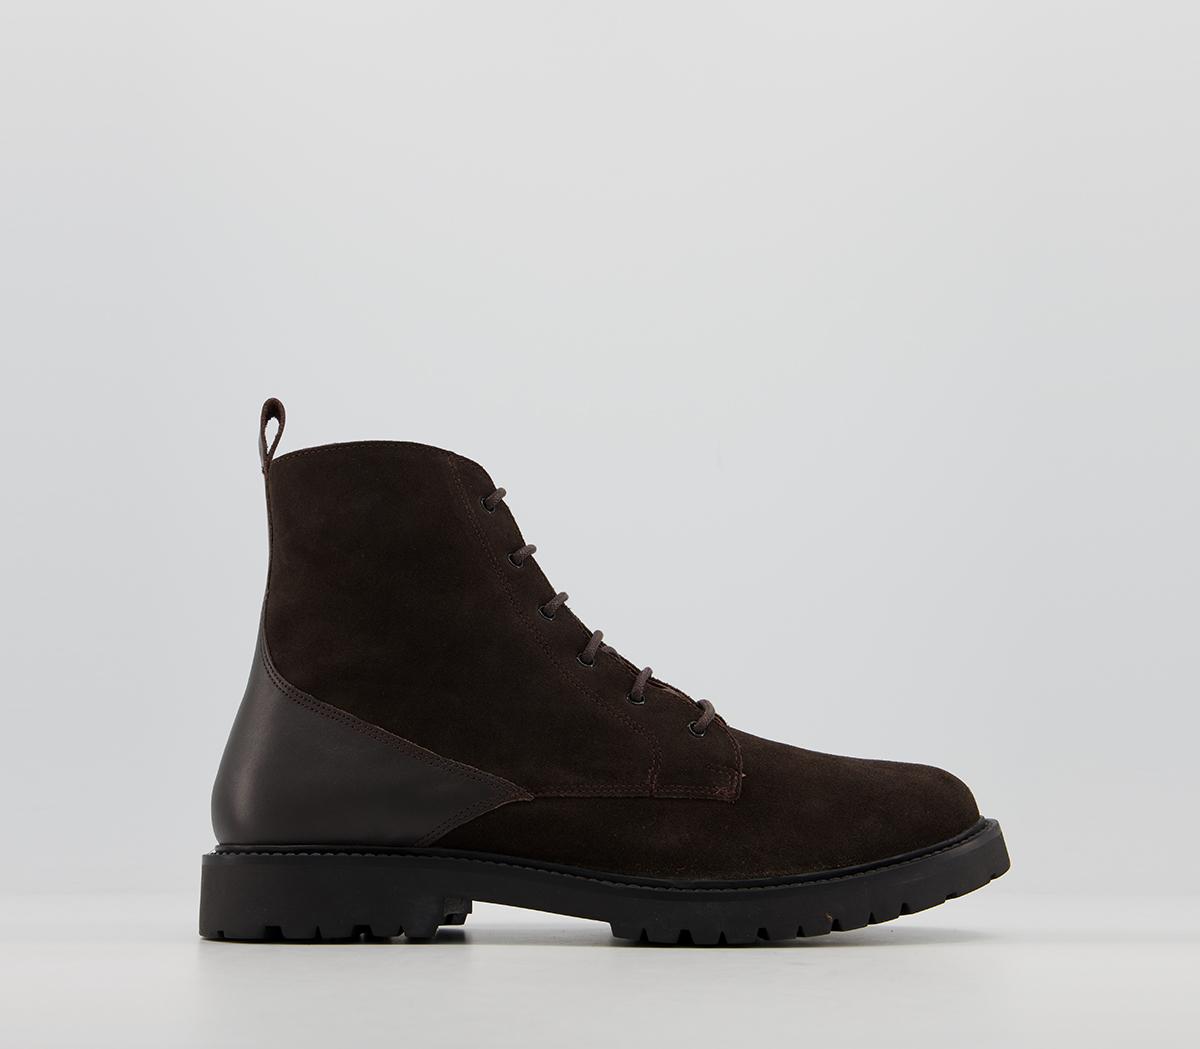 Hudson LondonPerry Suede BootsBrown Suede